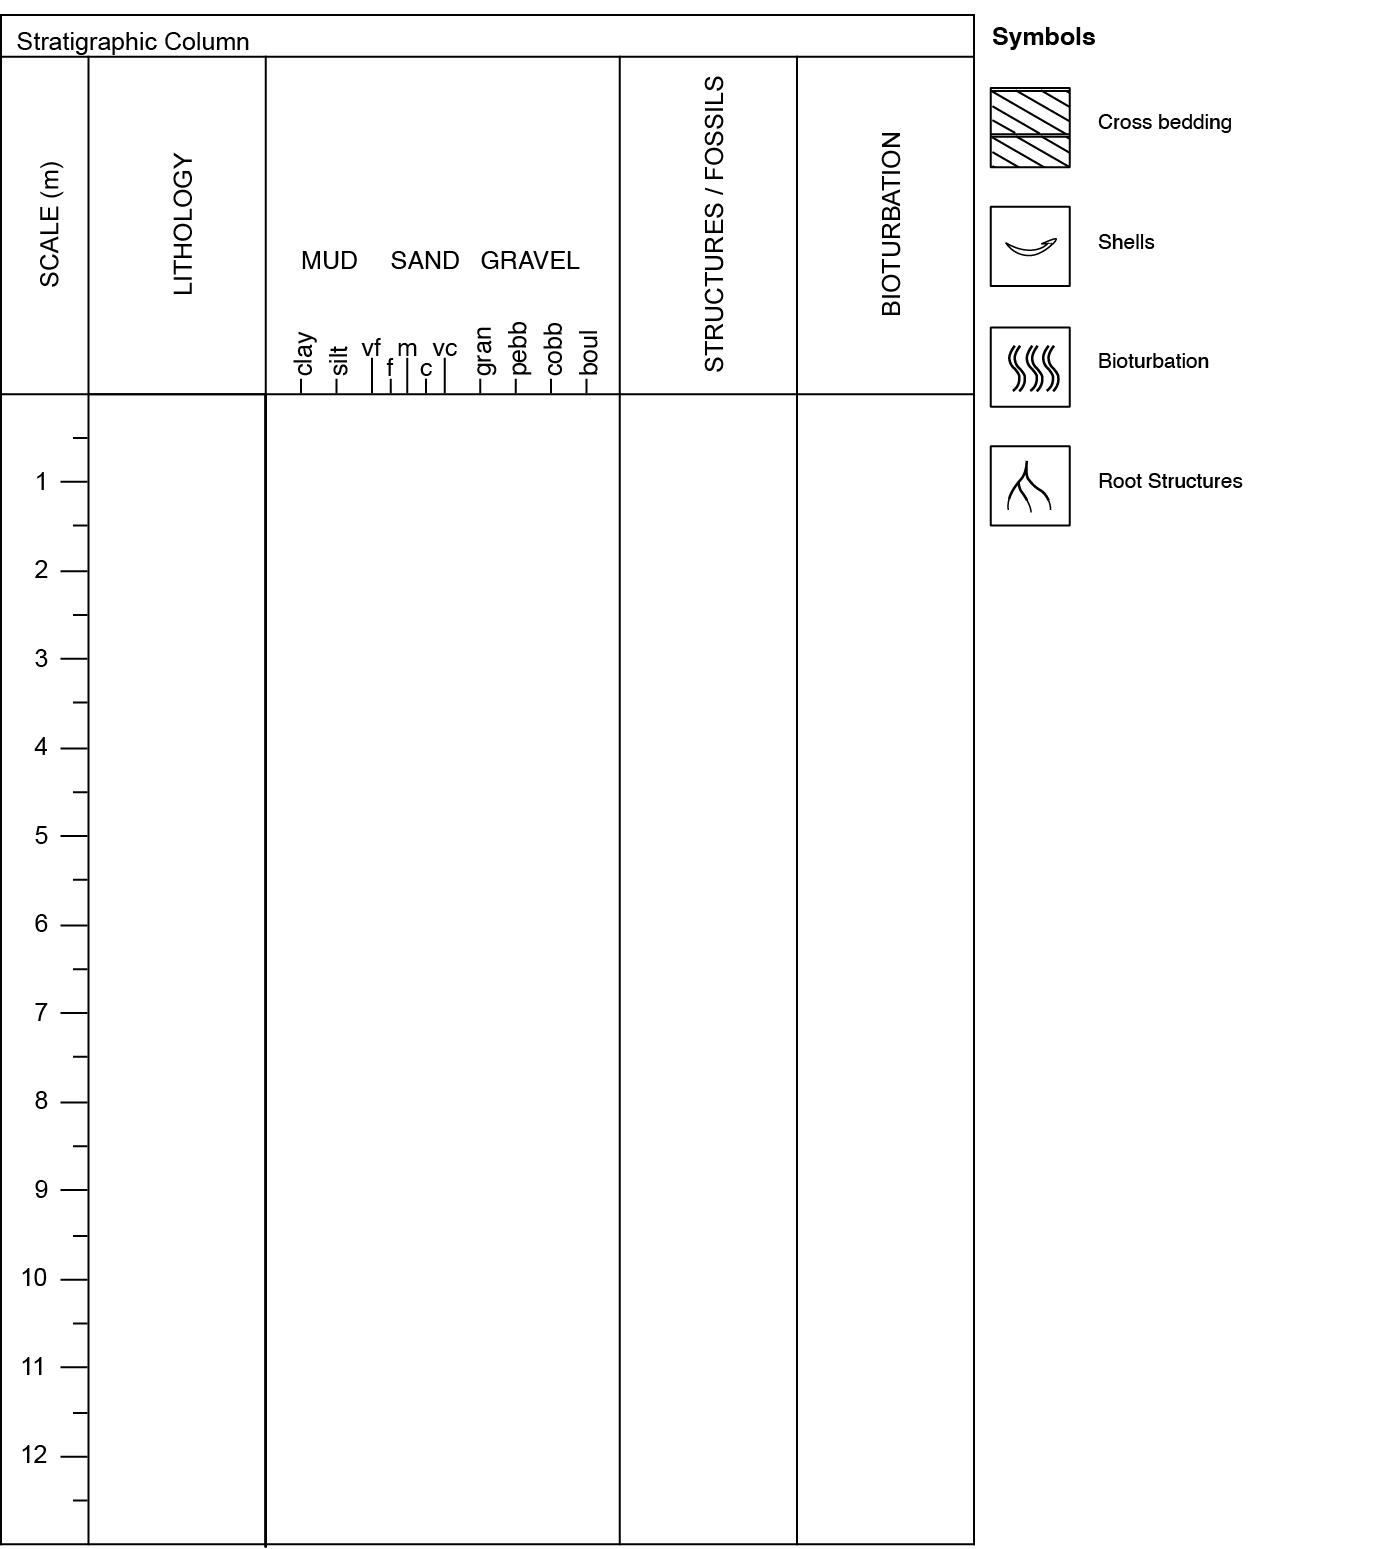 A detailed stratigraphic column that you need to fill out as part of Exercise 5.4